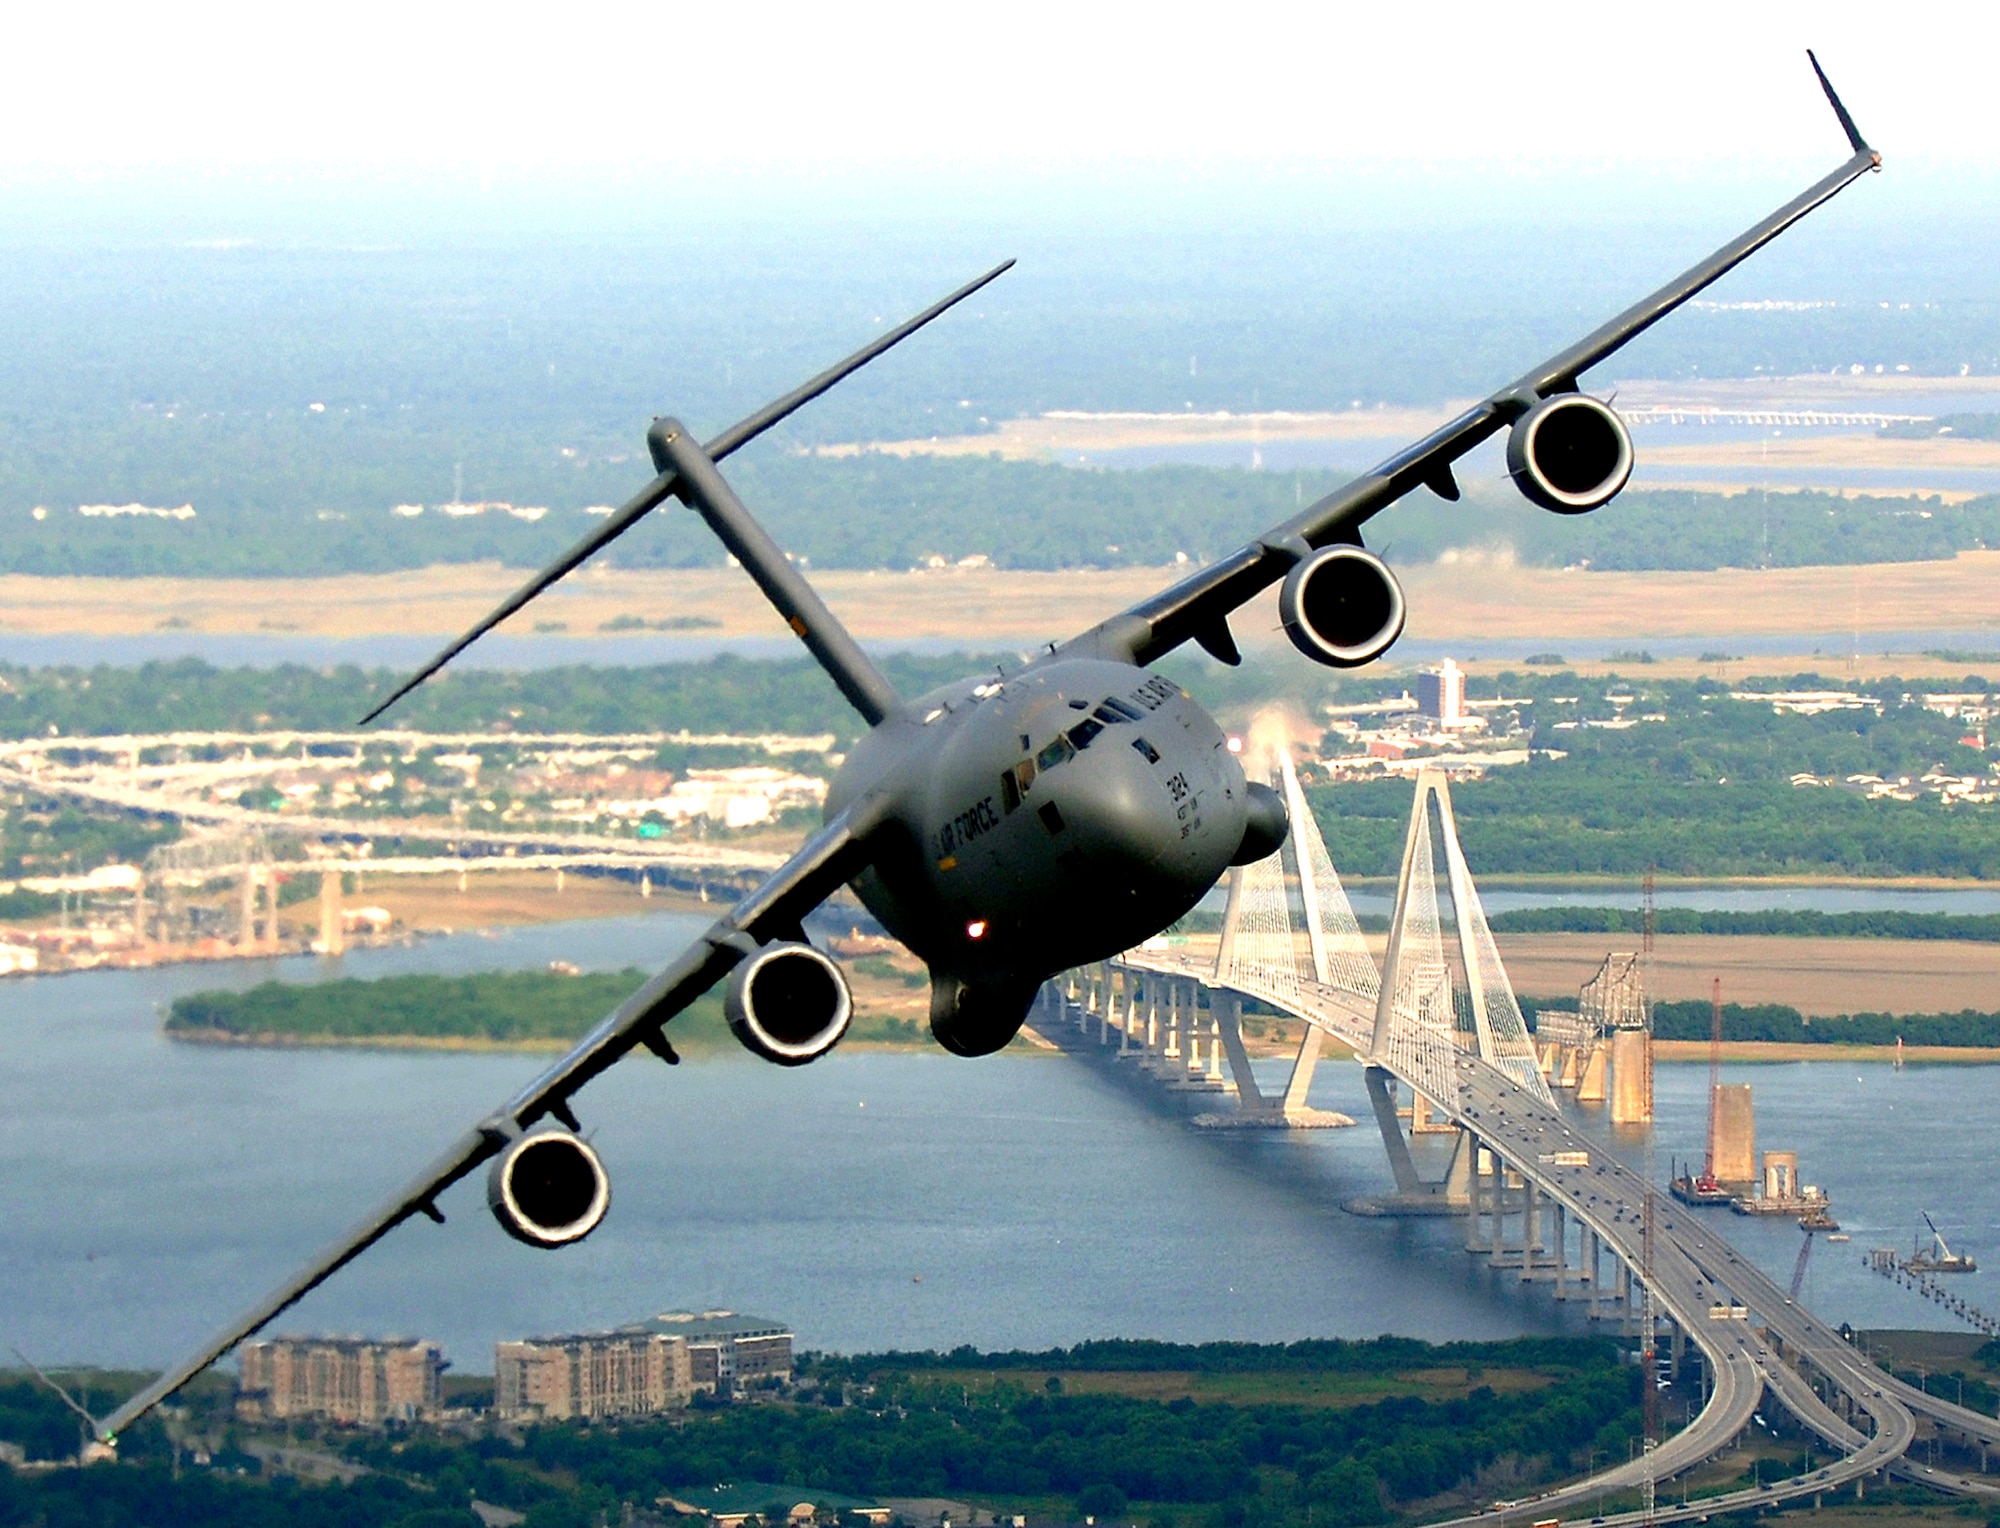 A C-17 Globemaster III from the 14th Airlift Squadron, Charleston Air Force Base, S.C., banks over the Arthur J. Ravenel Bridge in Charleston, S.C., during a training mission on Tuesday, May 16, 2006. (U.S. Air Force photo/Tech. Sgt. Russell E. Cooley IV)